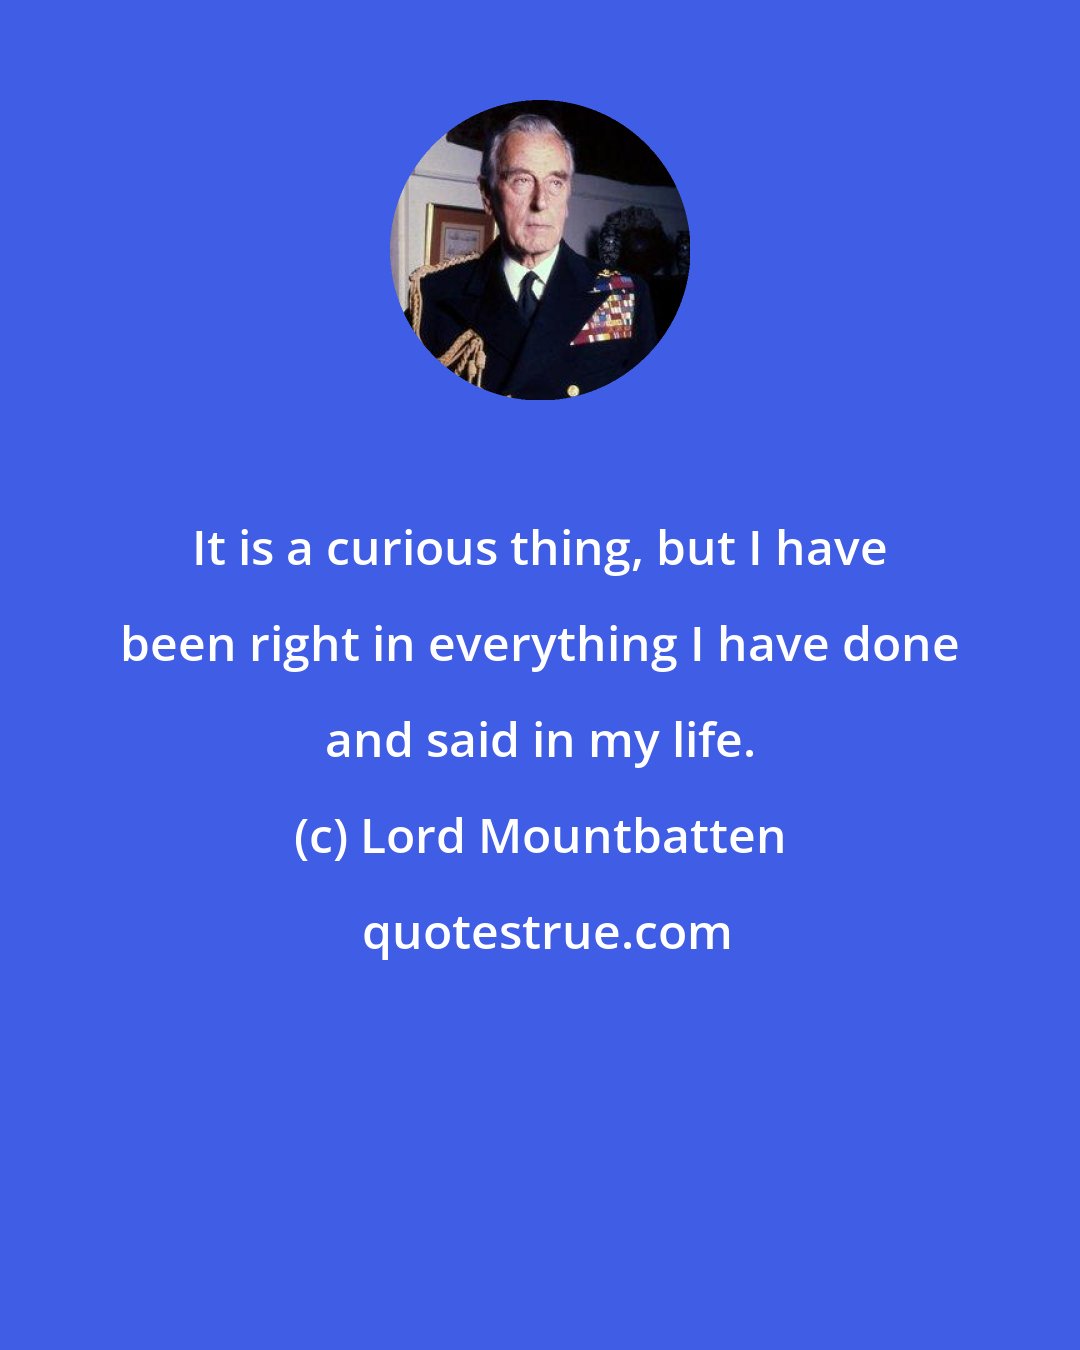 Lord Mountbatten: It is a curious thing, but I have been right in everything I have done and said in my life.